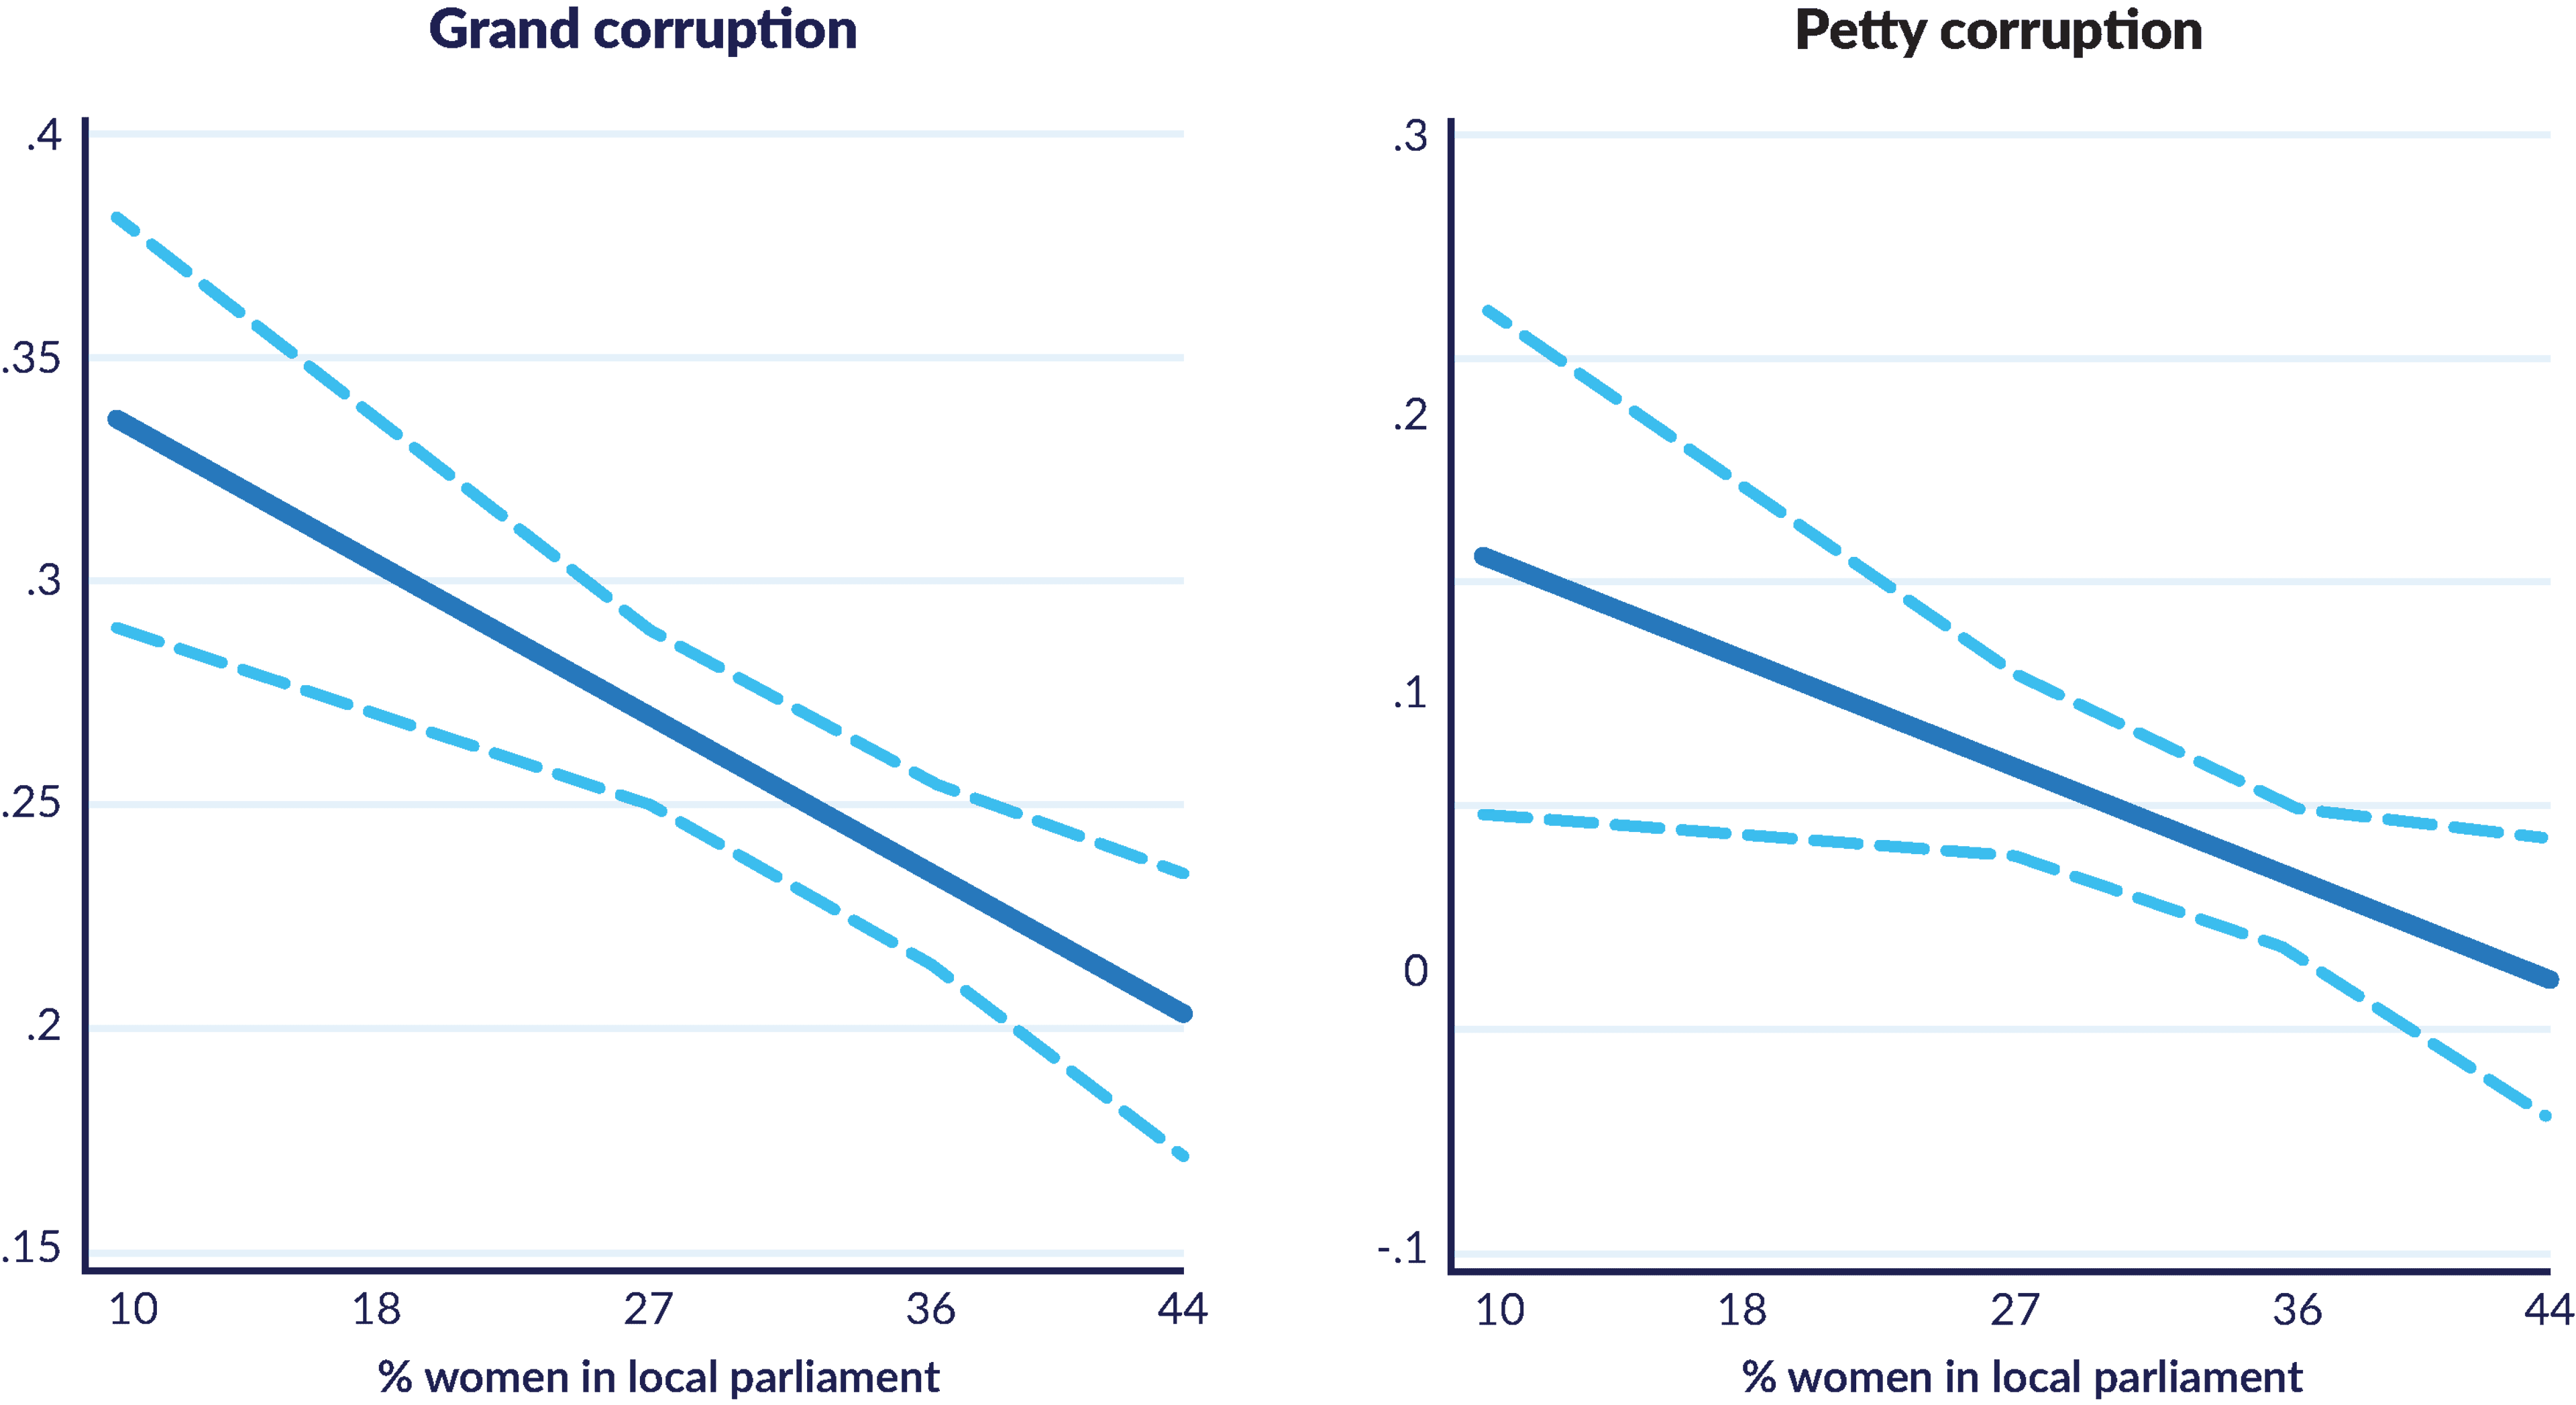 Graphs showing how relationship between women local parliament and grand and petty corruption